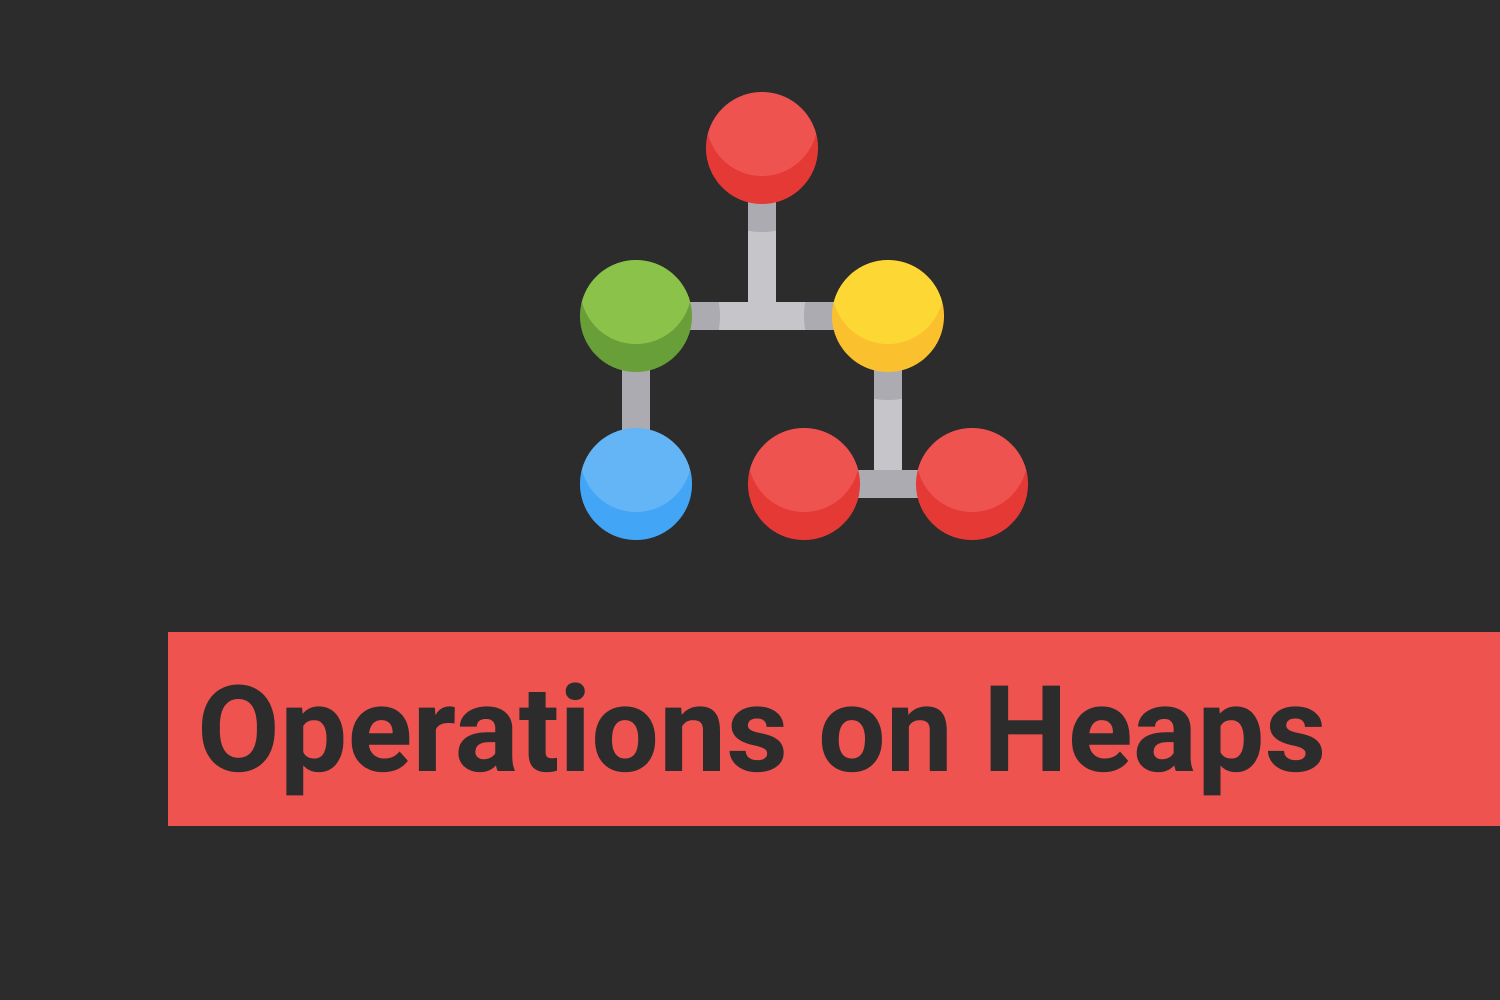 Operations on Heaps